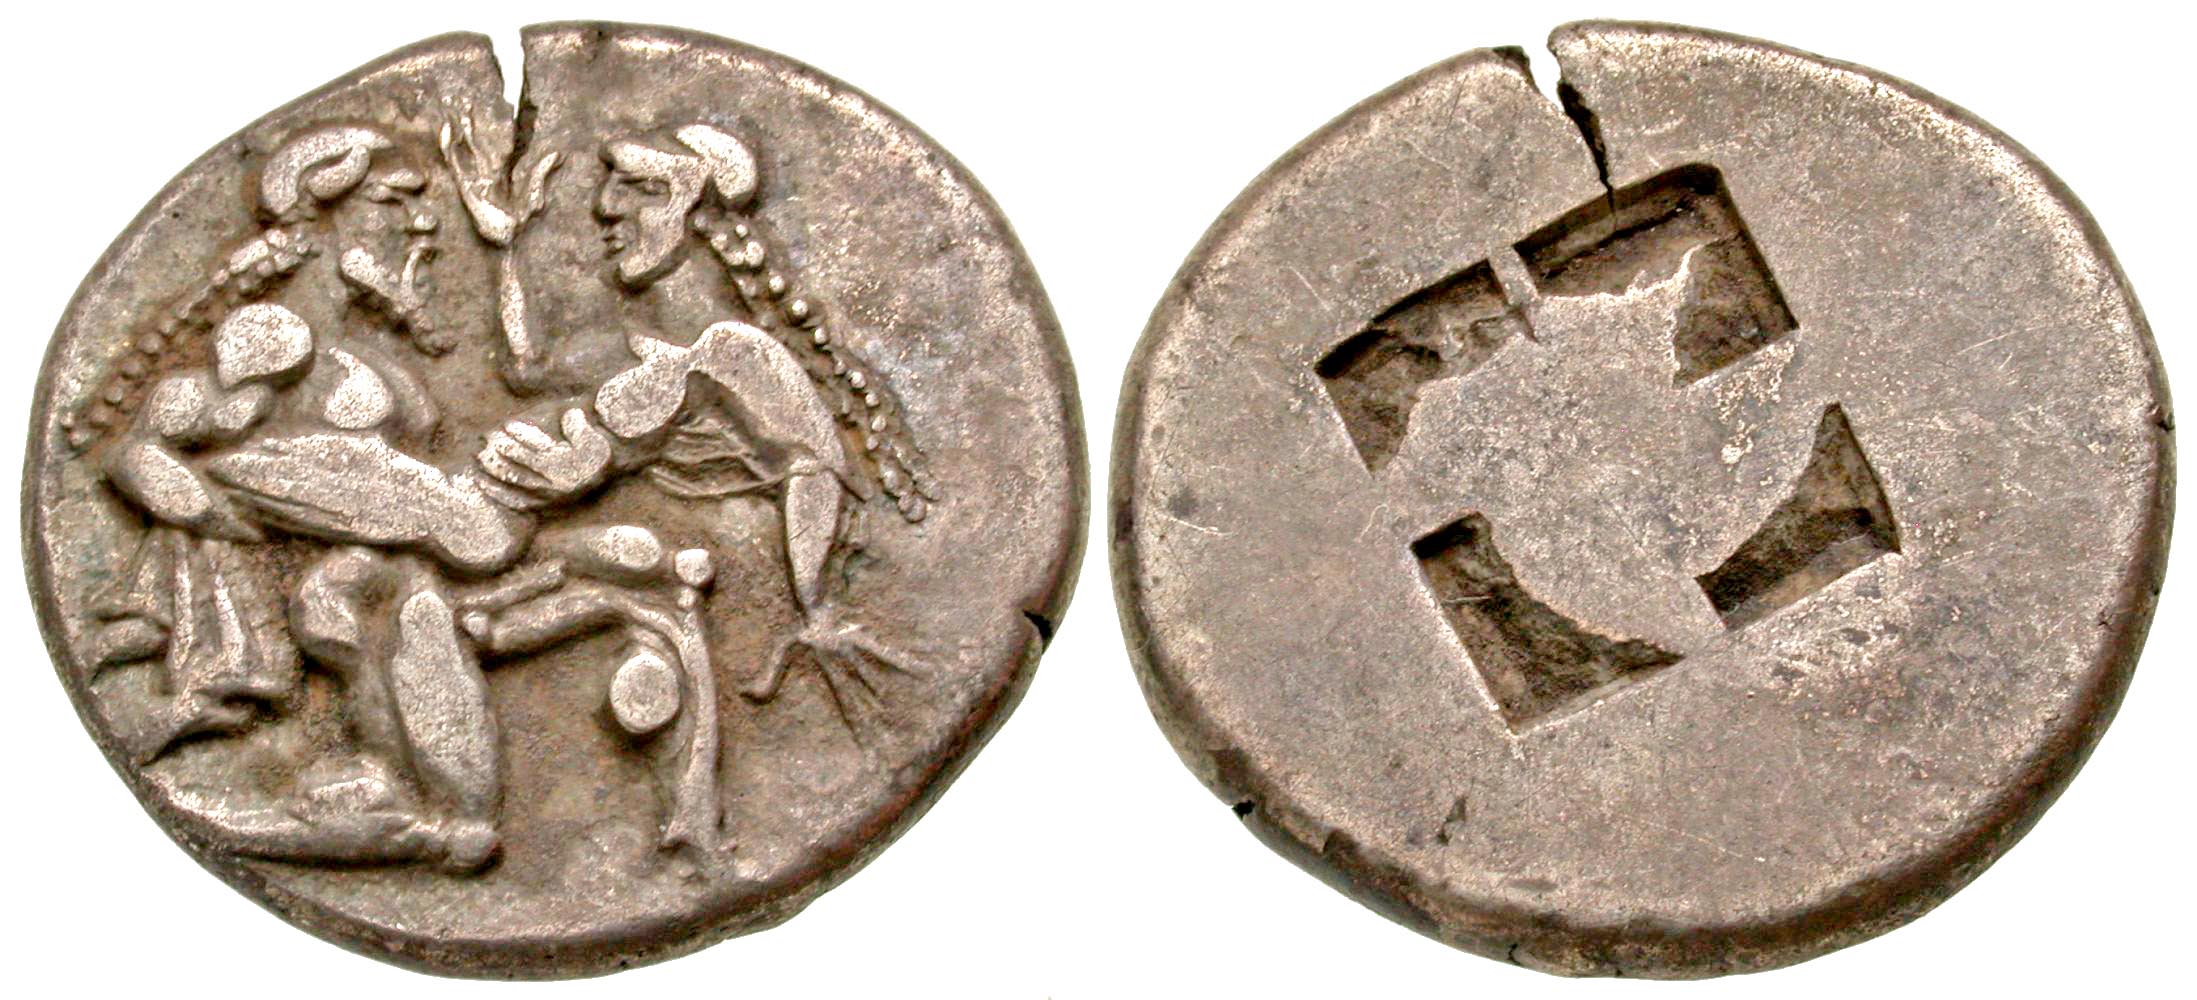 Islands off Thrace, Thasos. Thasos. Ca. 500-463 B.C. AR stater. Ex CNG, EAuction 185, lot 22. 